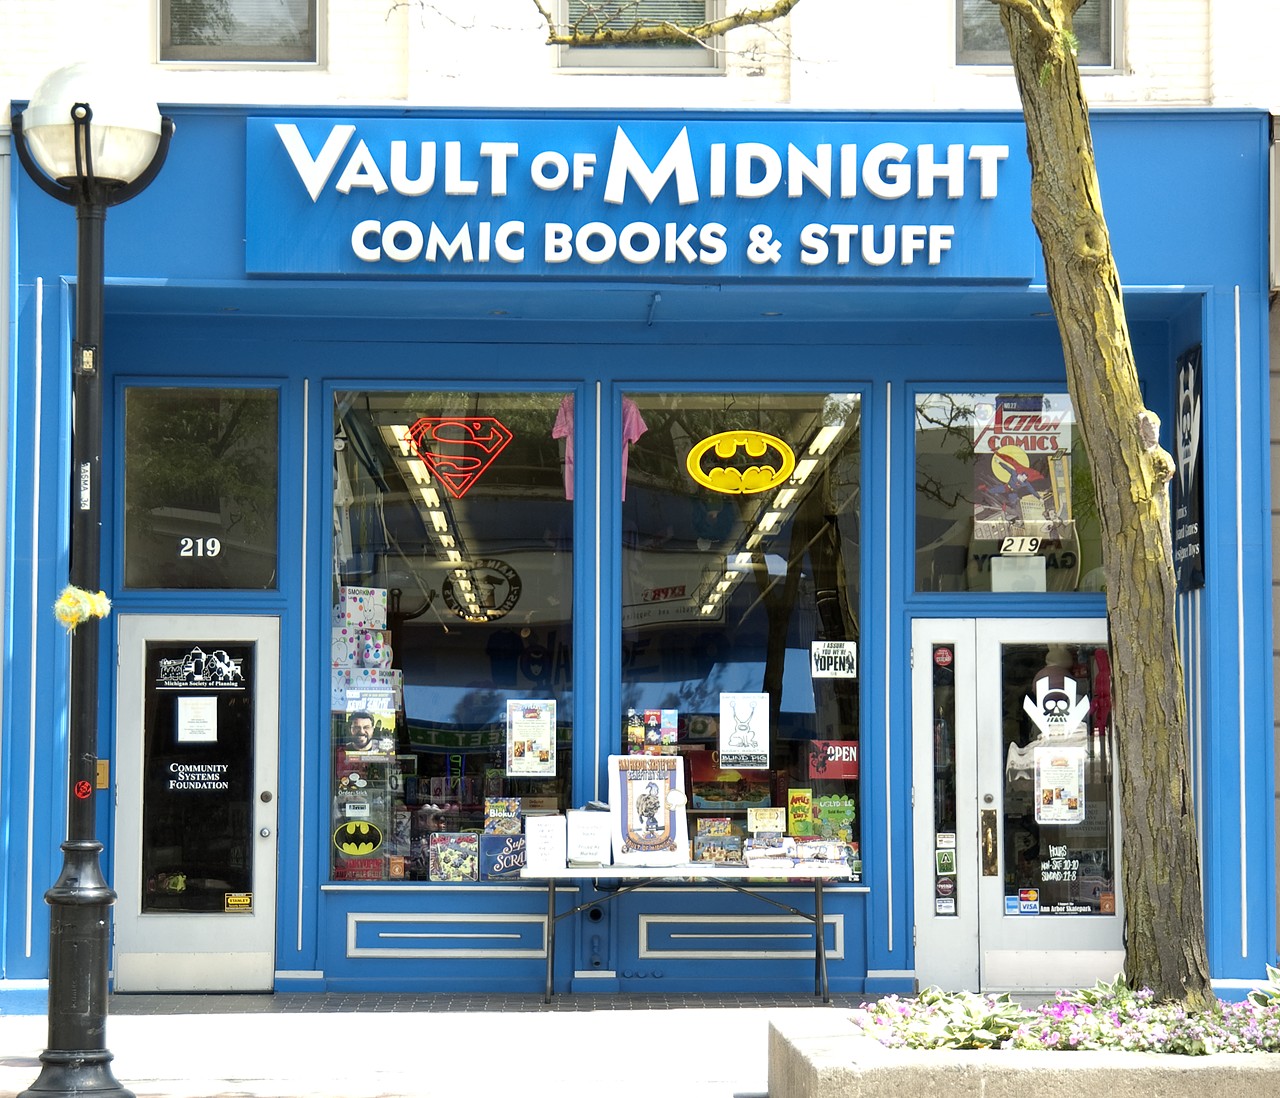 90) Geek out at Vault of Midnight: If one thing has become clear over the past couple of decades, it’s that toys and comic books are wasted on kids. That’s why you won’t find many people younger than 20 — though they are welcome — at the Vault of Midnight in Ann Arbor. Rather, you’ll find adults drooling over the latest Batman figurine or an anime book that features a six-dicked demon. See what all the fuss it about.